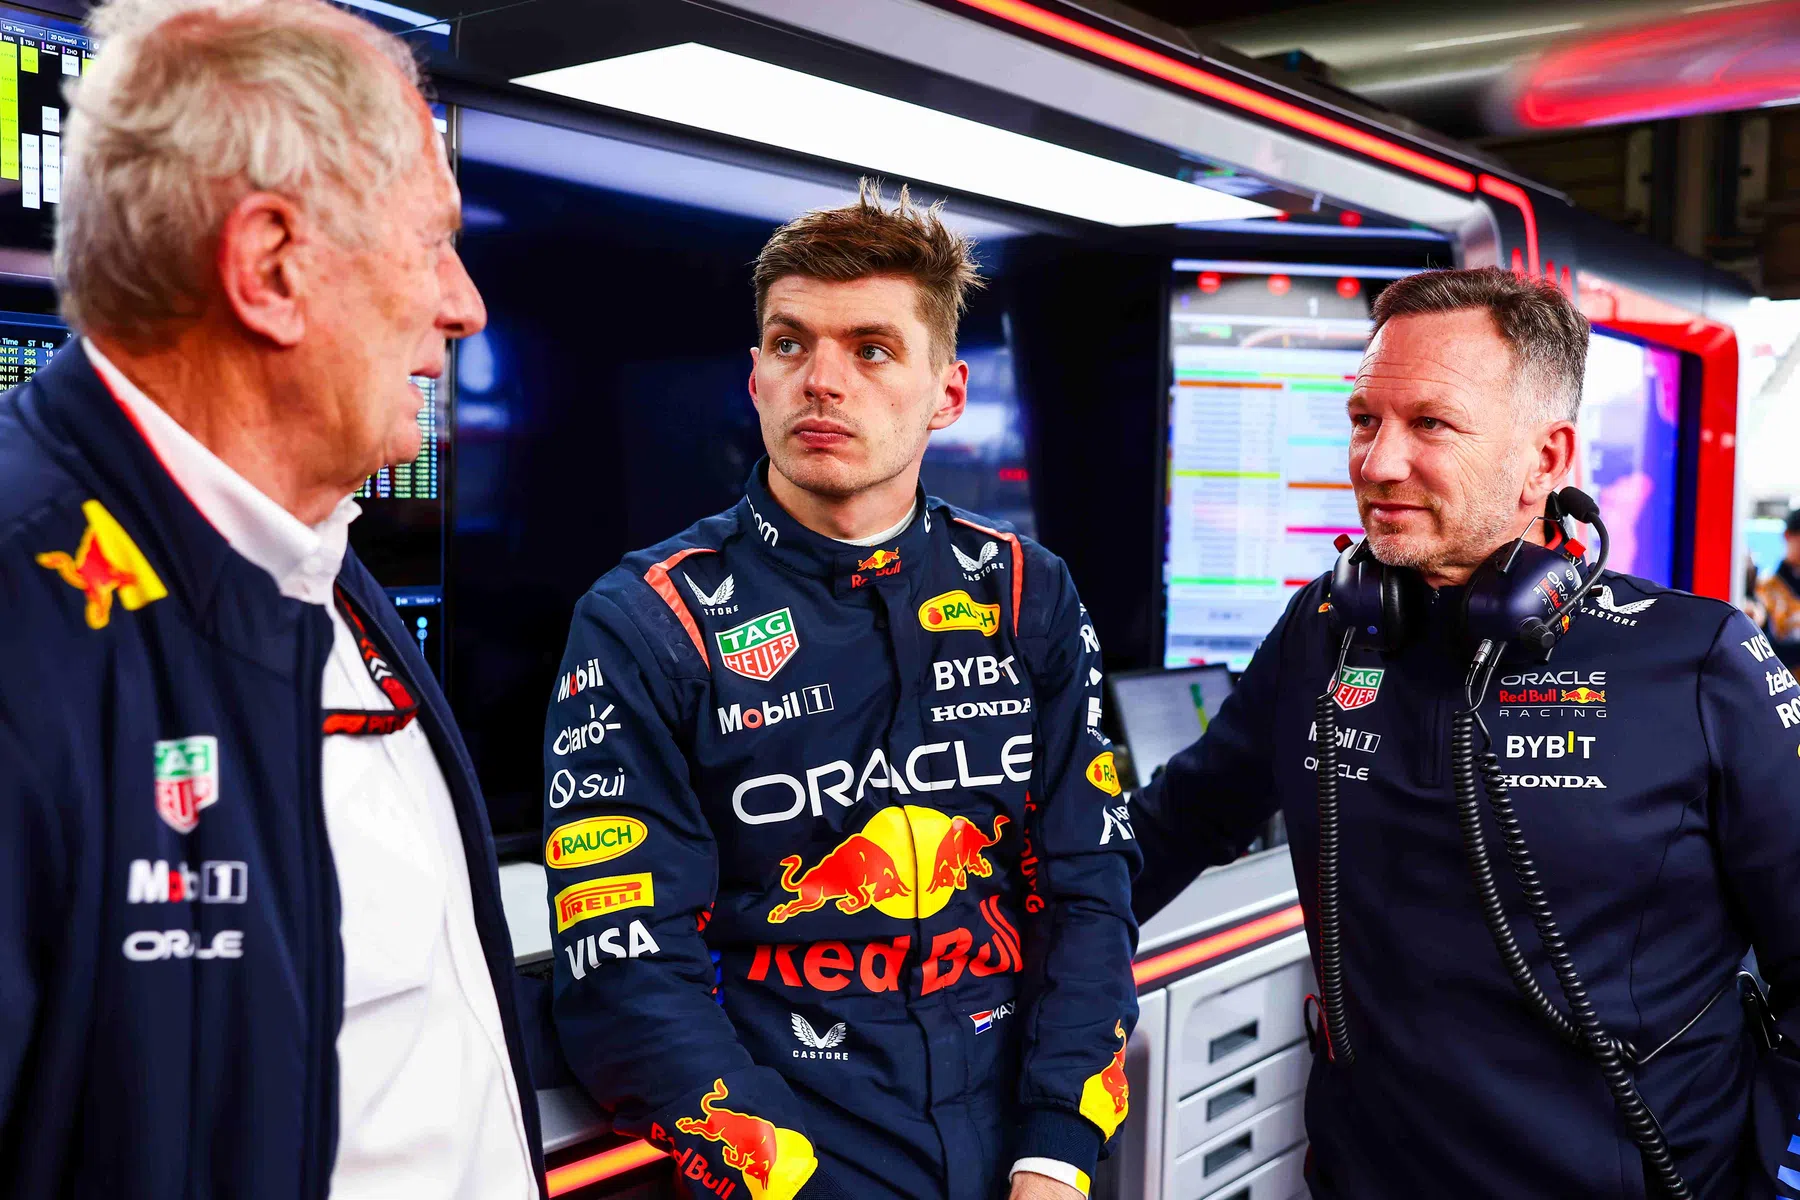 Helmut Marko after the first two free practice sessions in Japan